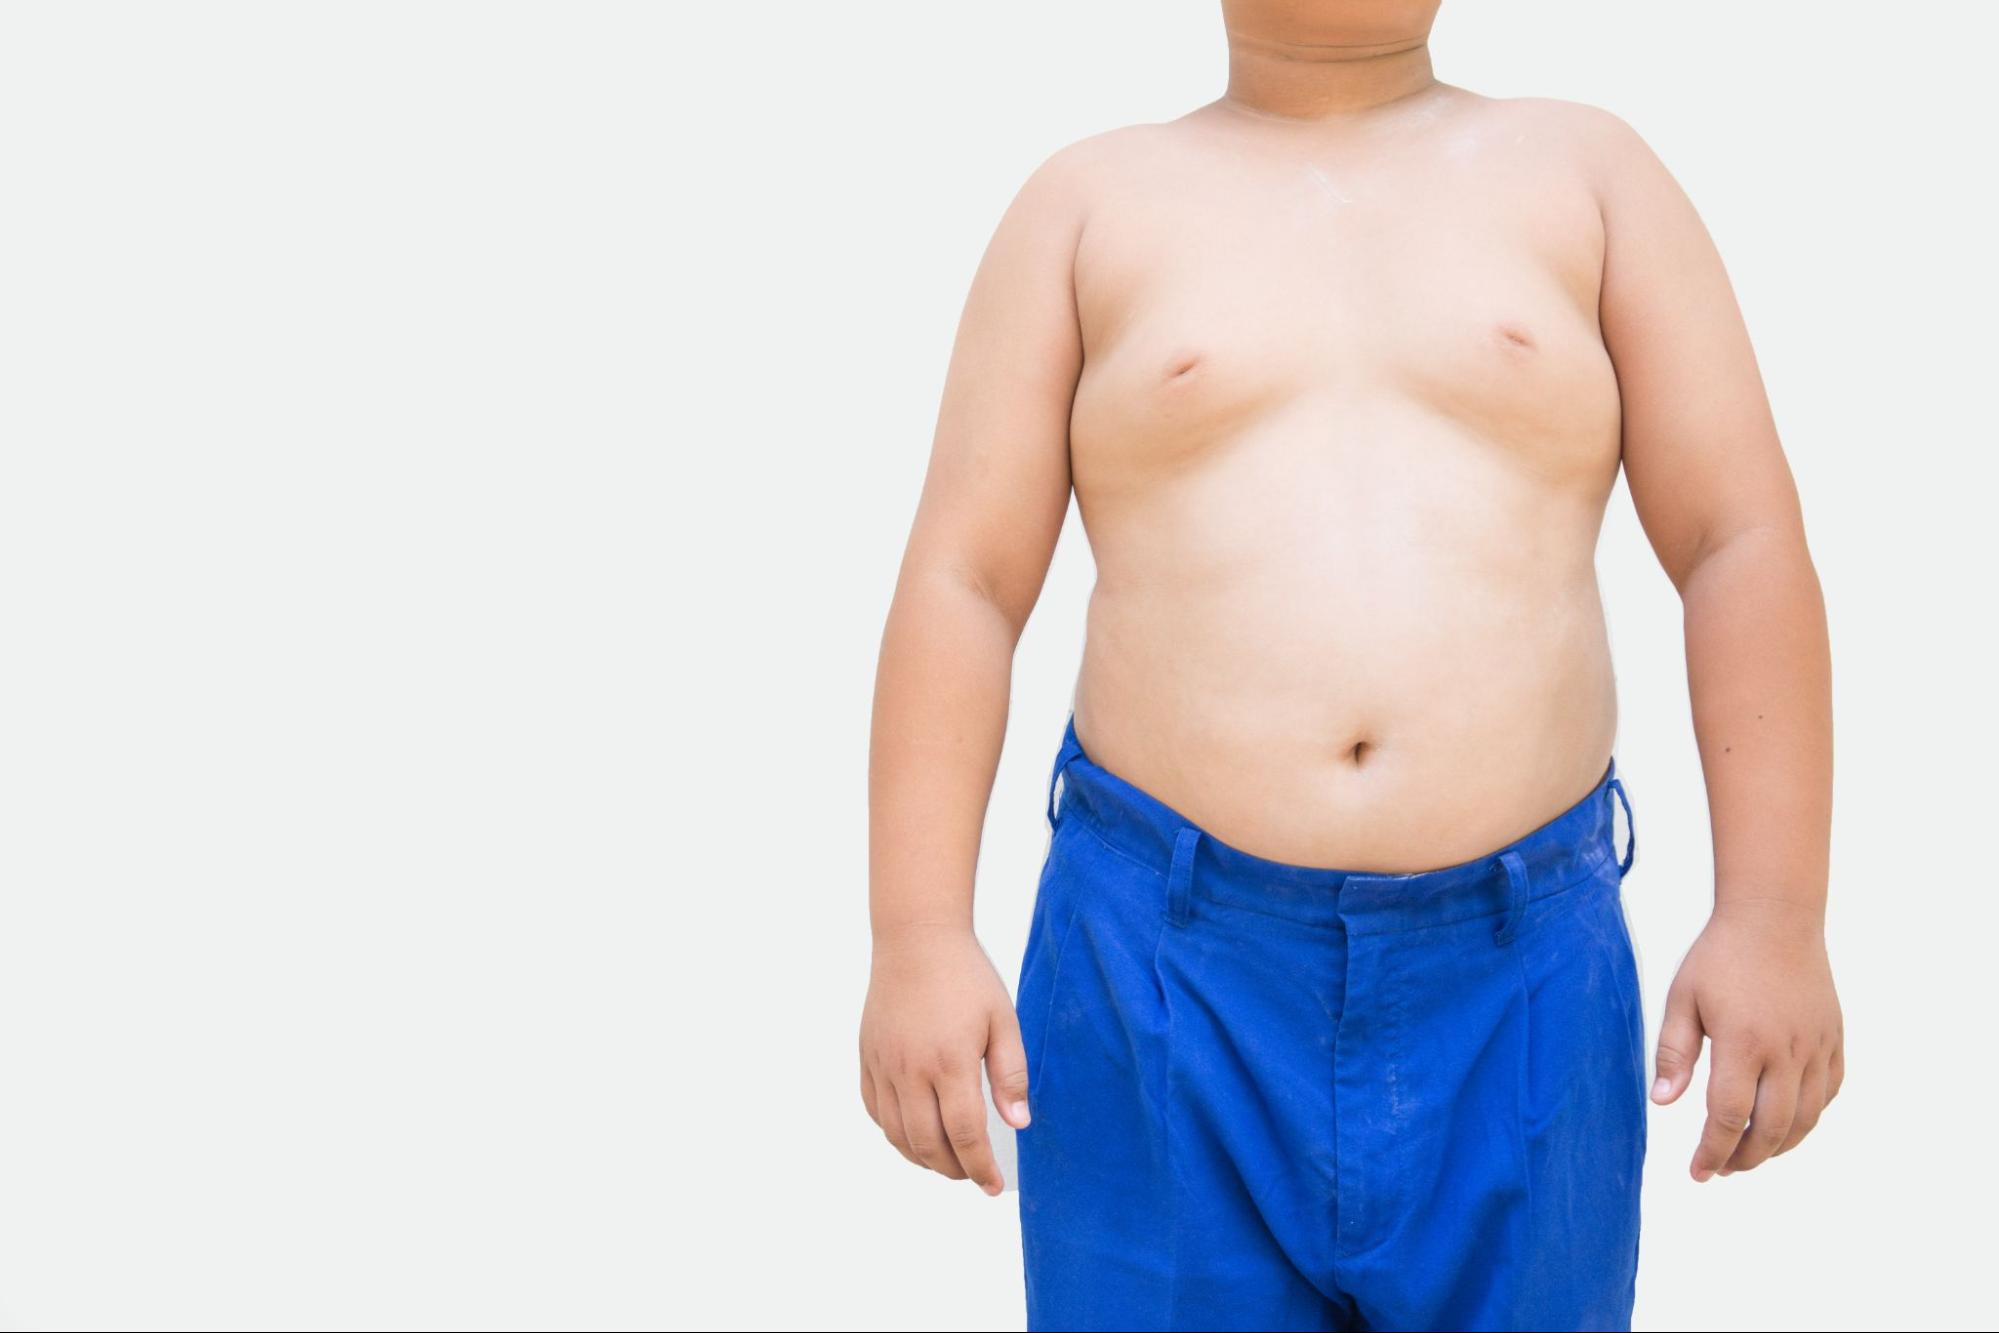 What is the Best Treatment for Gynecomastia?